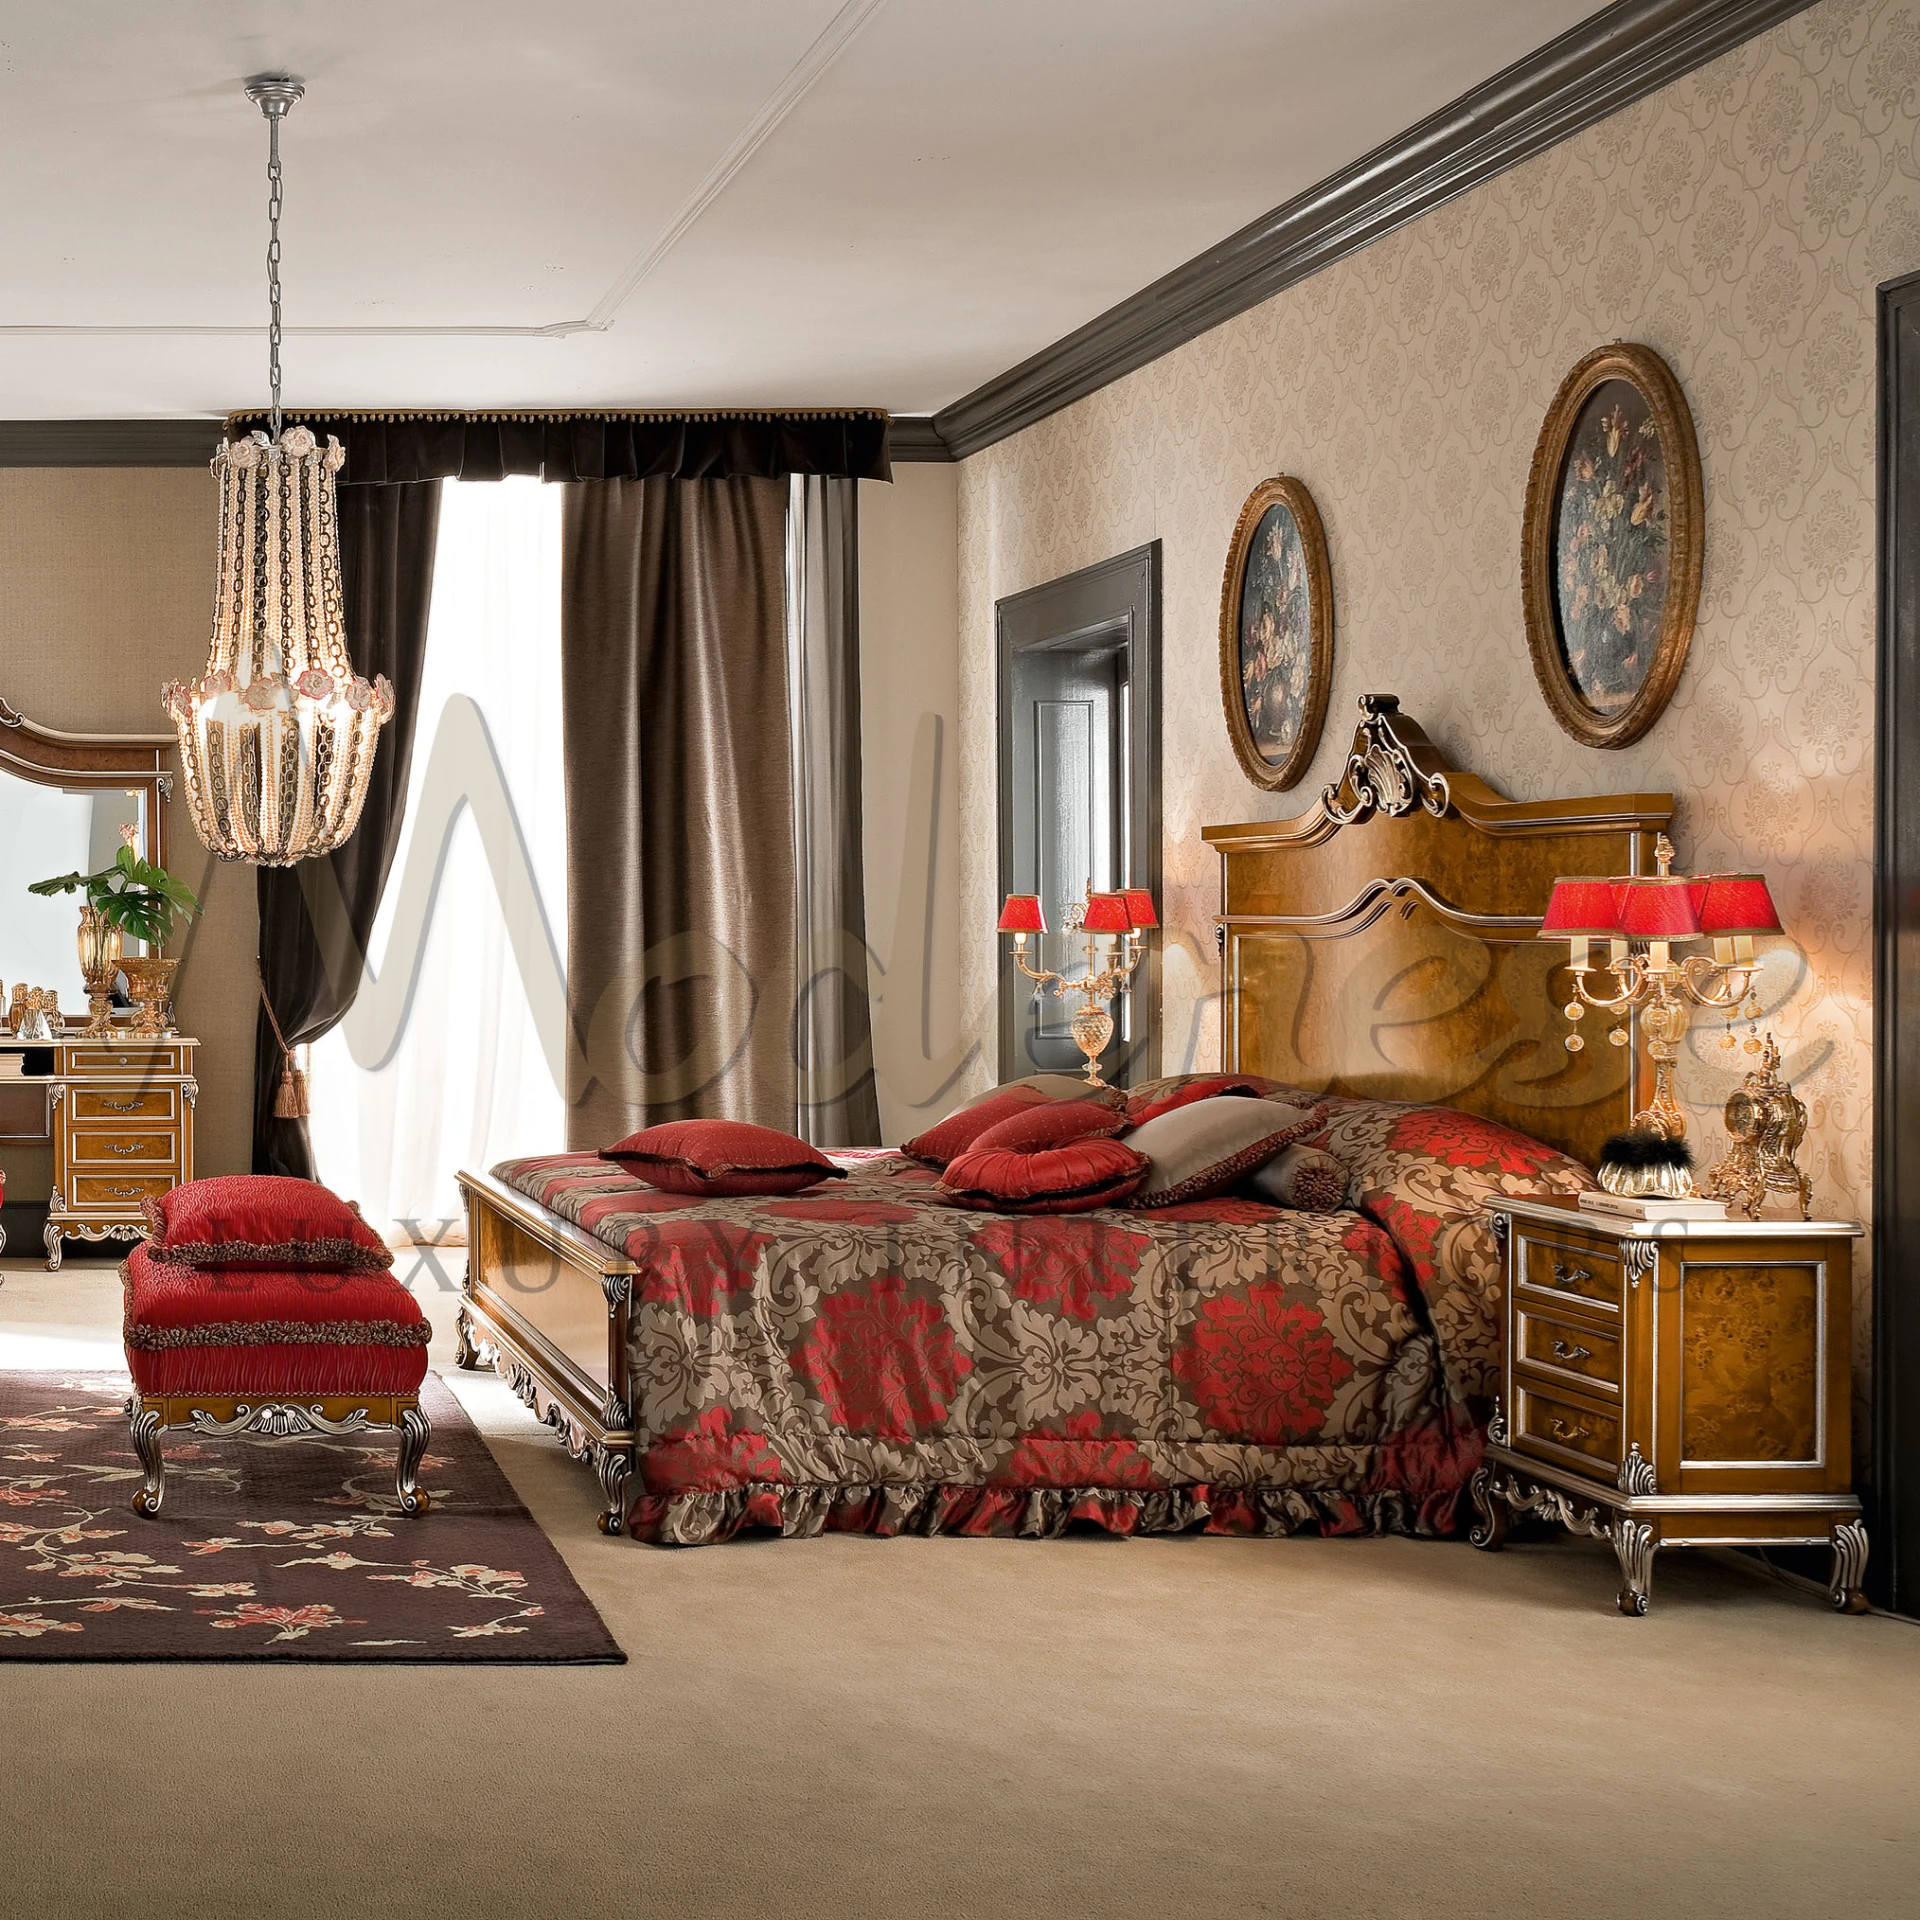 Unmatched Grace of the luxury red upholstered bench:Transform your bedroom with our Luxury Classical Bench.                                            